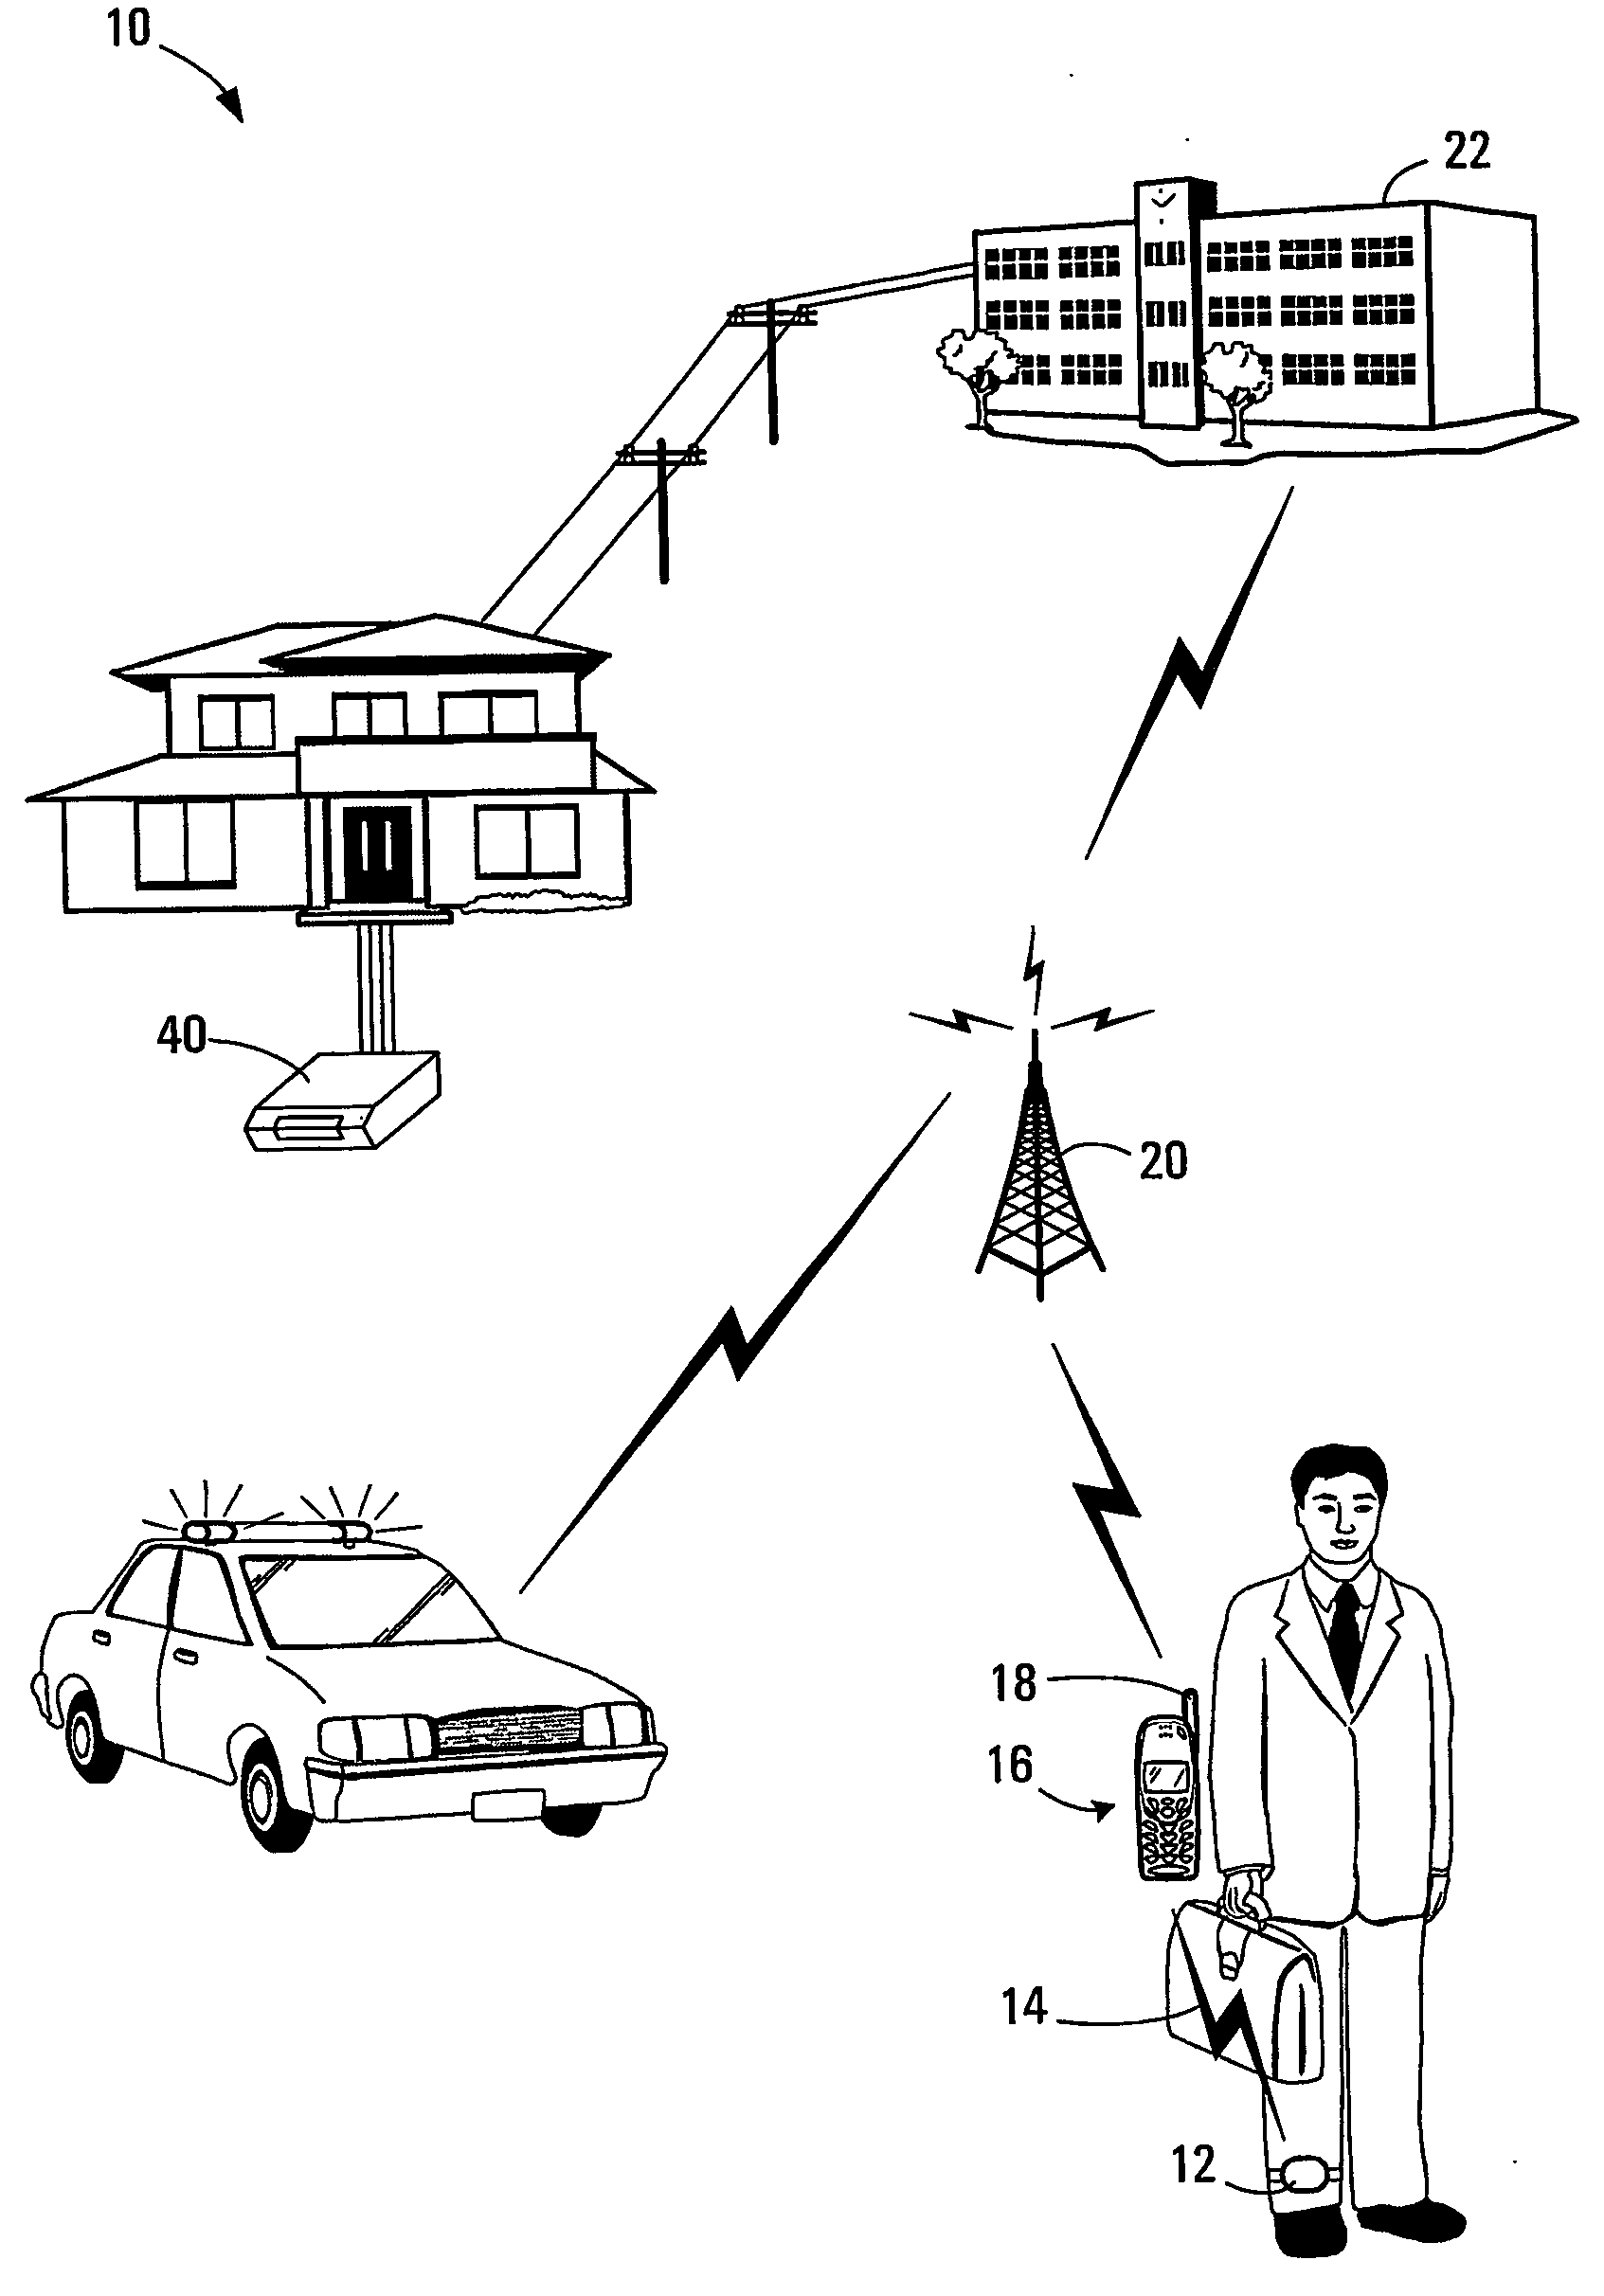 Electronic location monitoring system